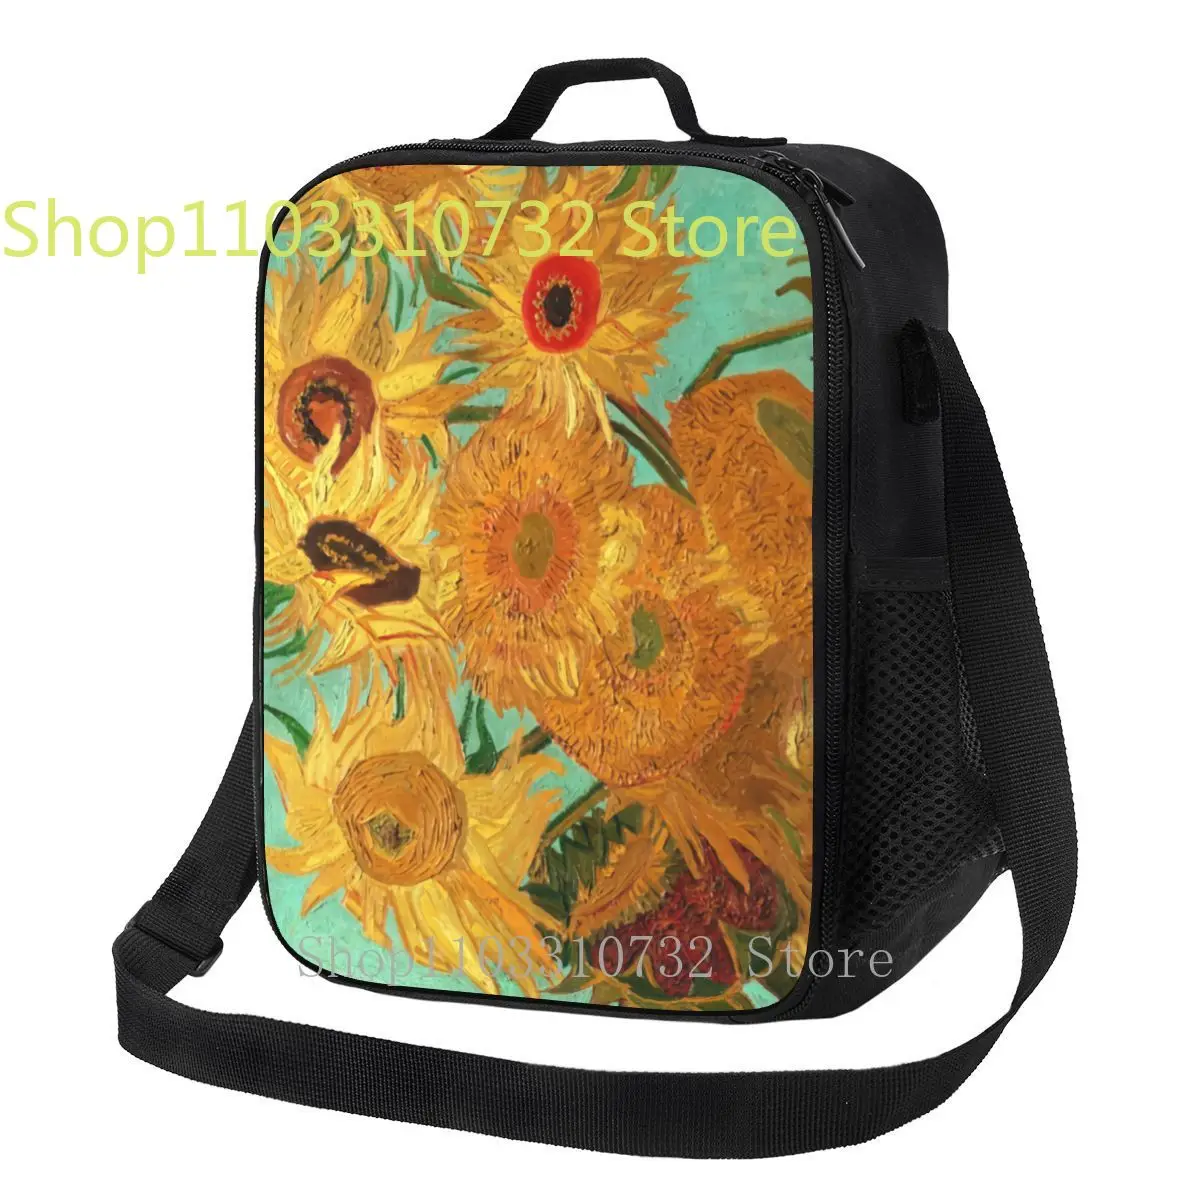 

Vincent Van Gogh Twelve Sunflowers In A Vase Mask Lunch Box Flowers Painting Thermal Cooler Food Insulated Lunch Bag Office Work